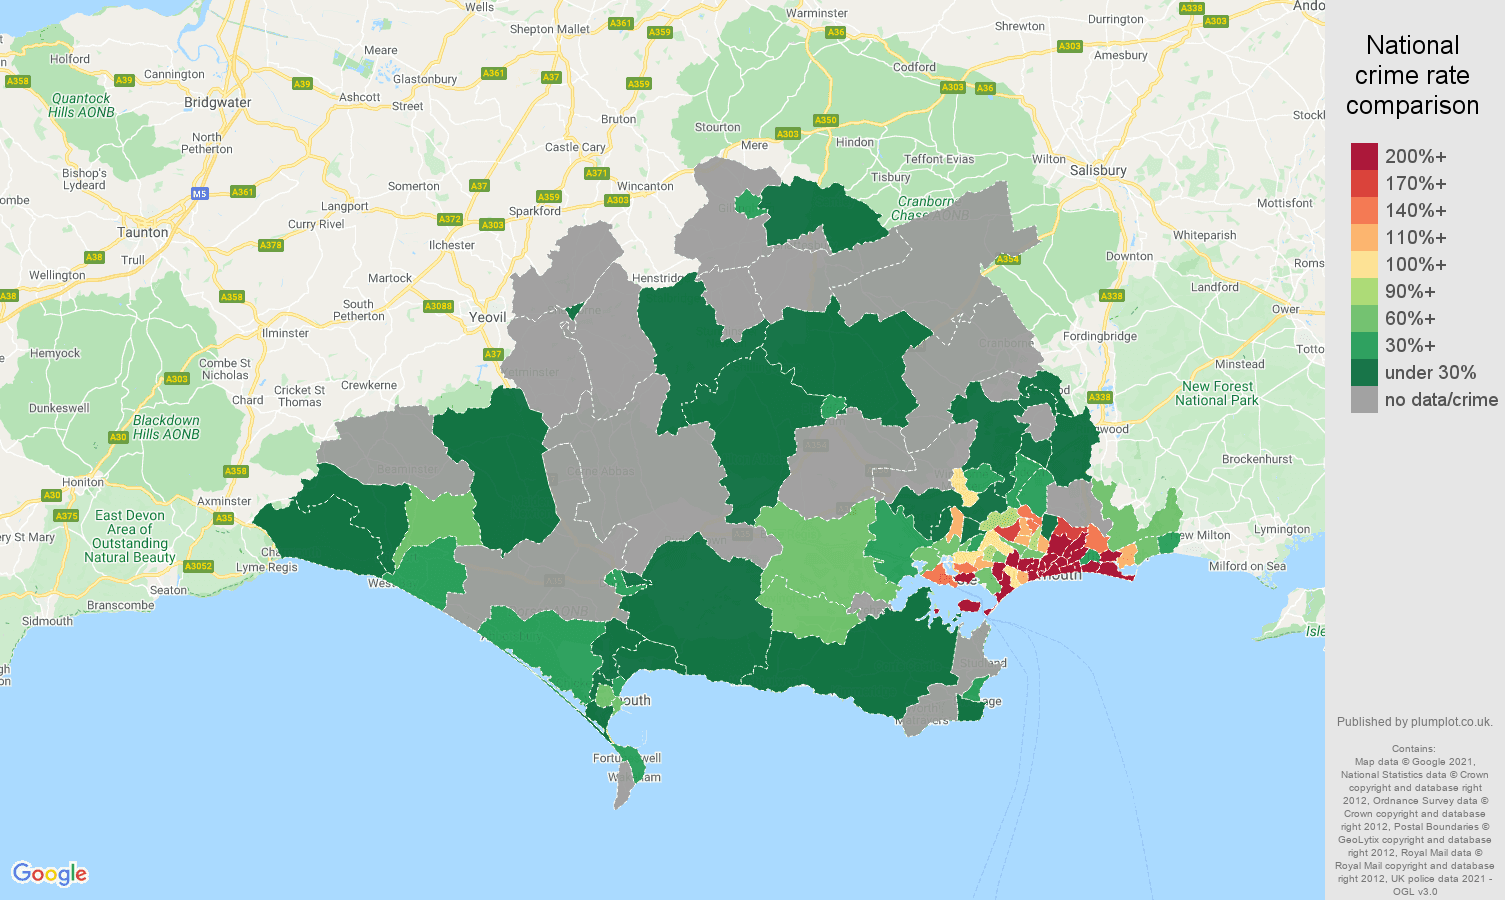 Dorset bicycle theft crime rate comparison map